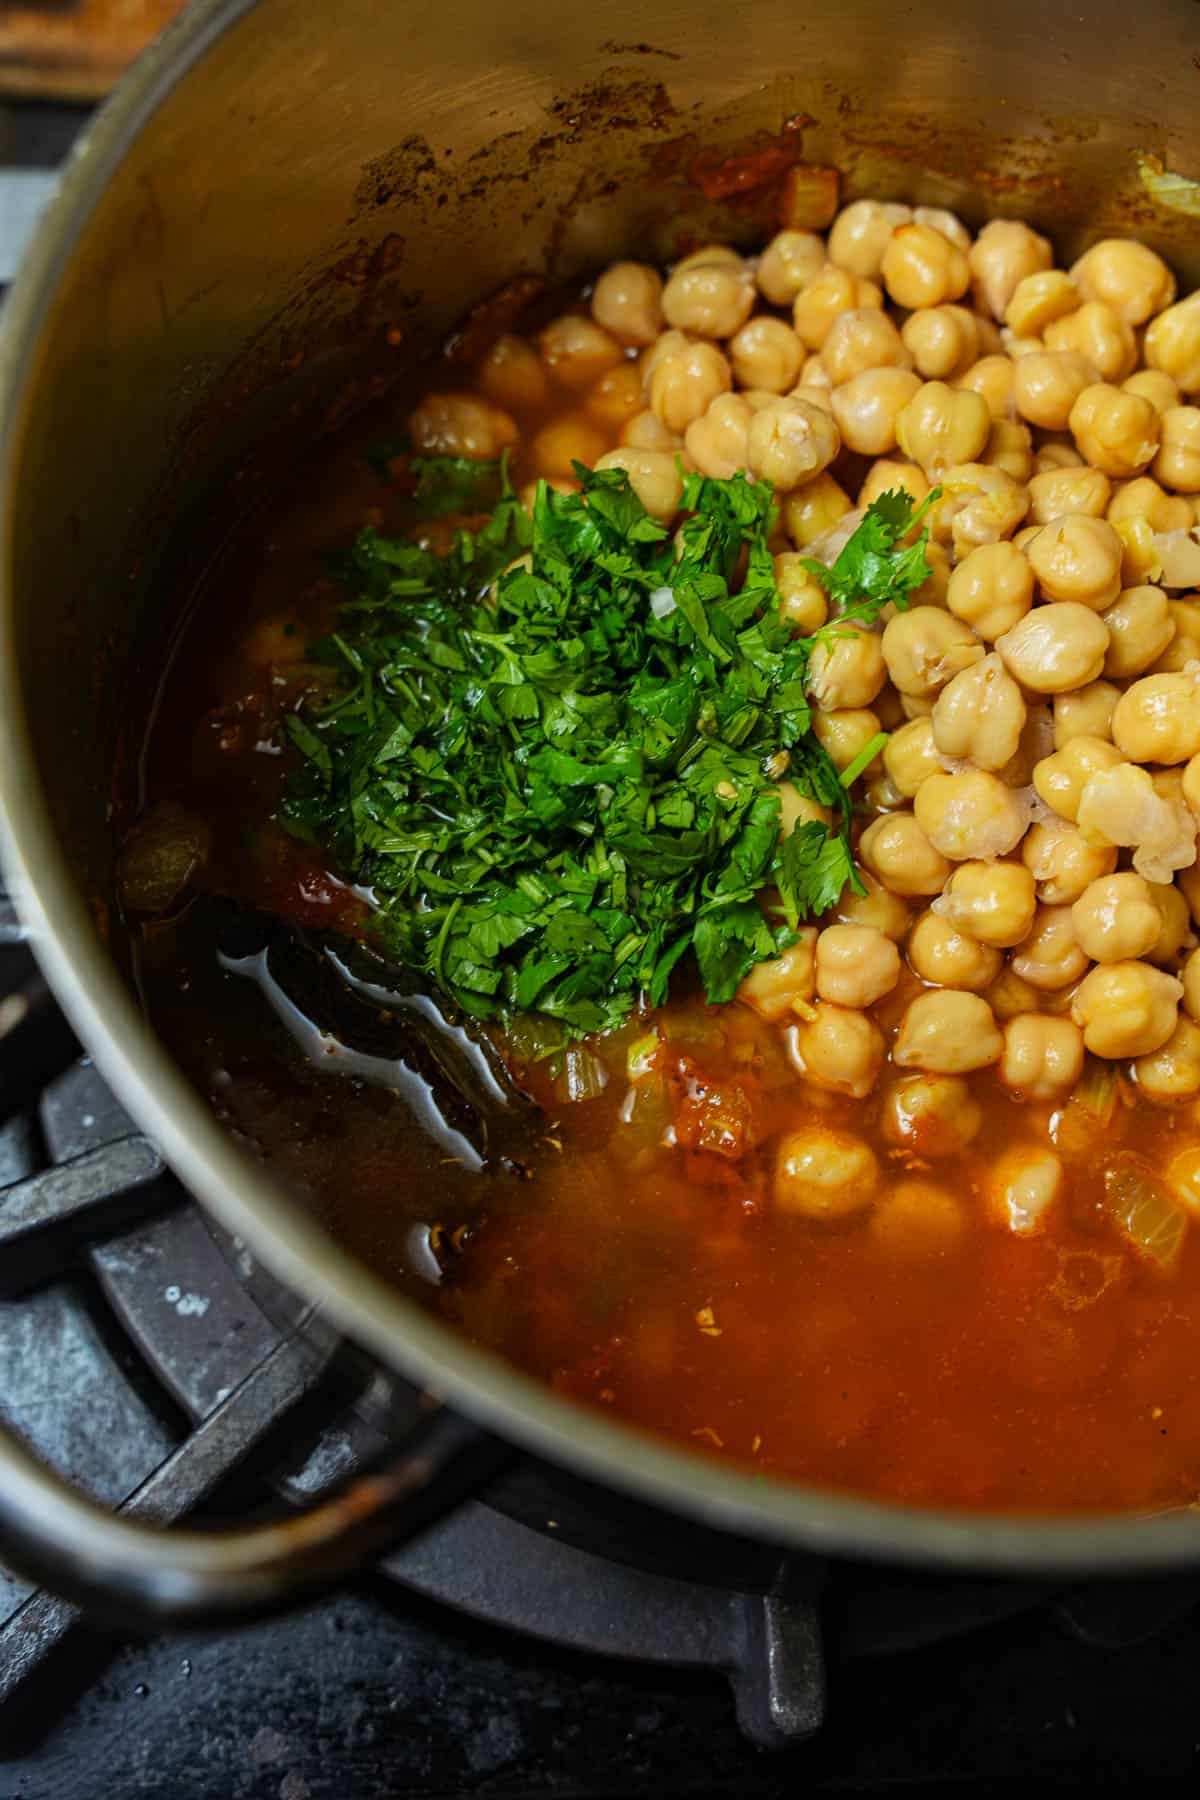 Cilantro water and chickpeas are added to the pot.